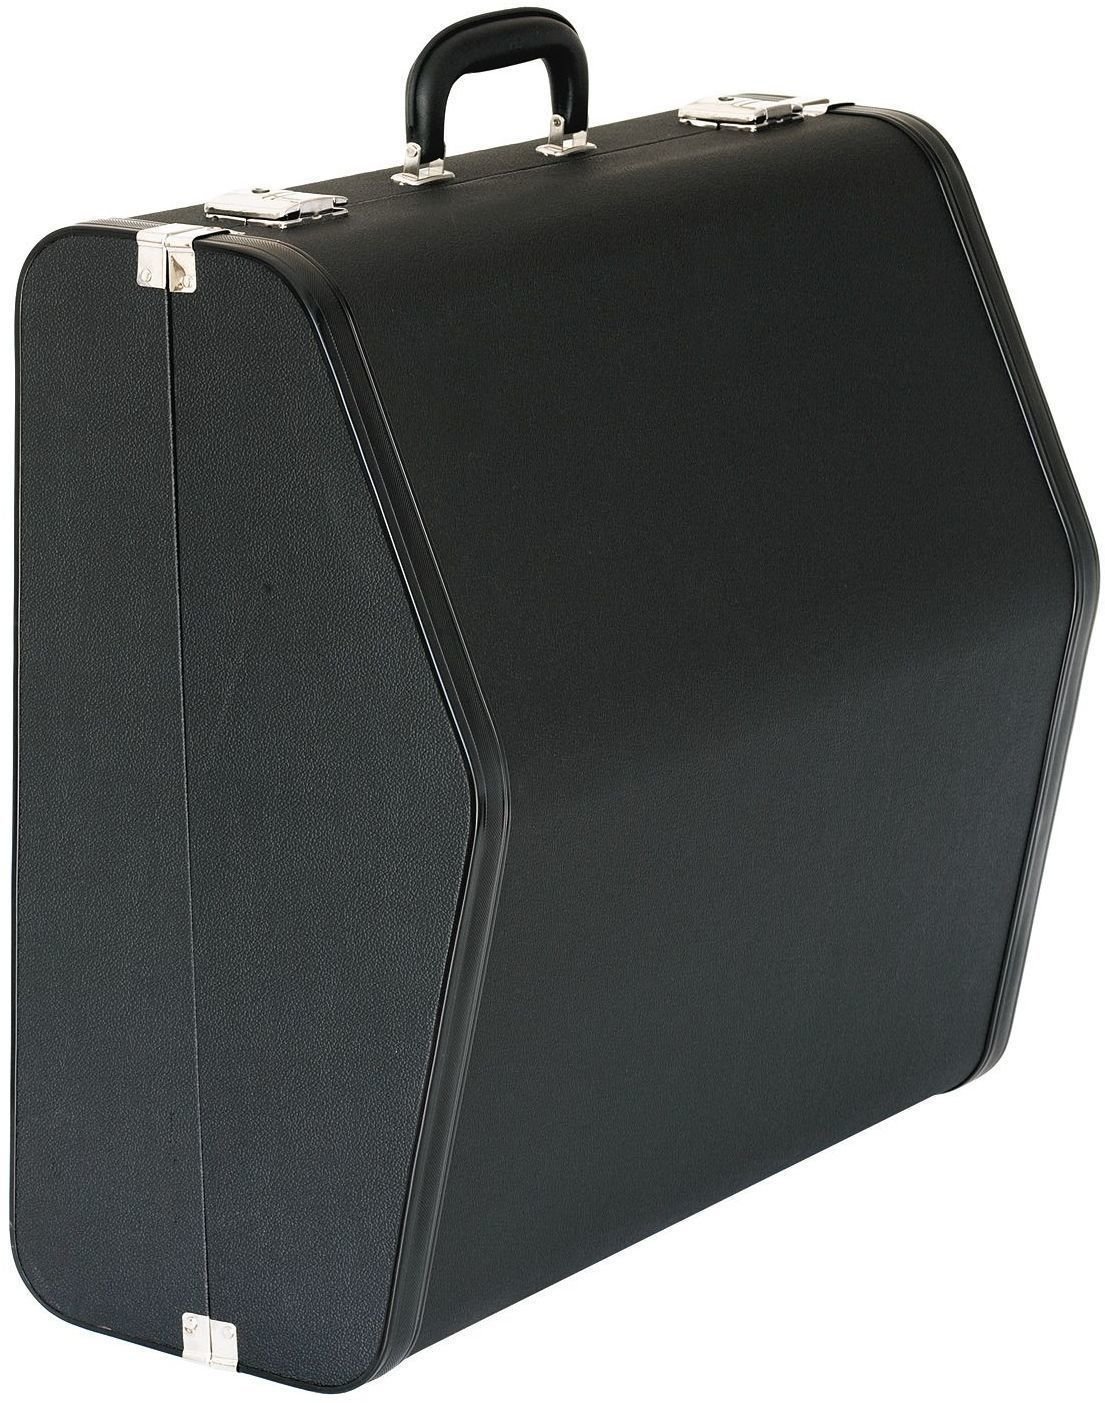 Case for Accordion Weltmeister 26/48-30/60 Perle/Rubin HC BK Case for Accordion